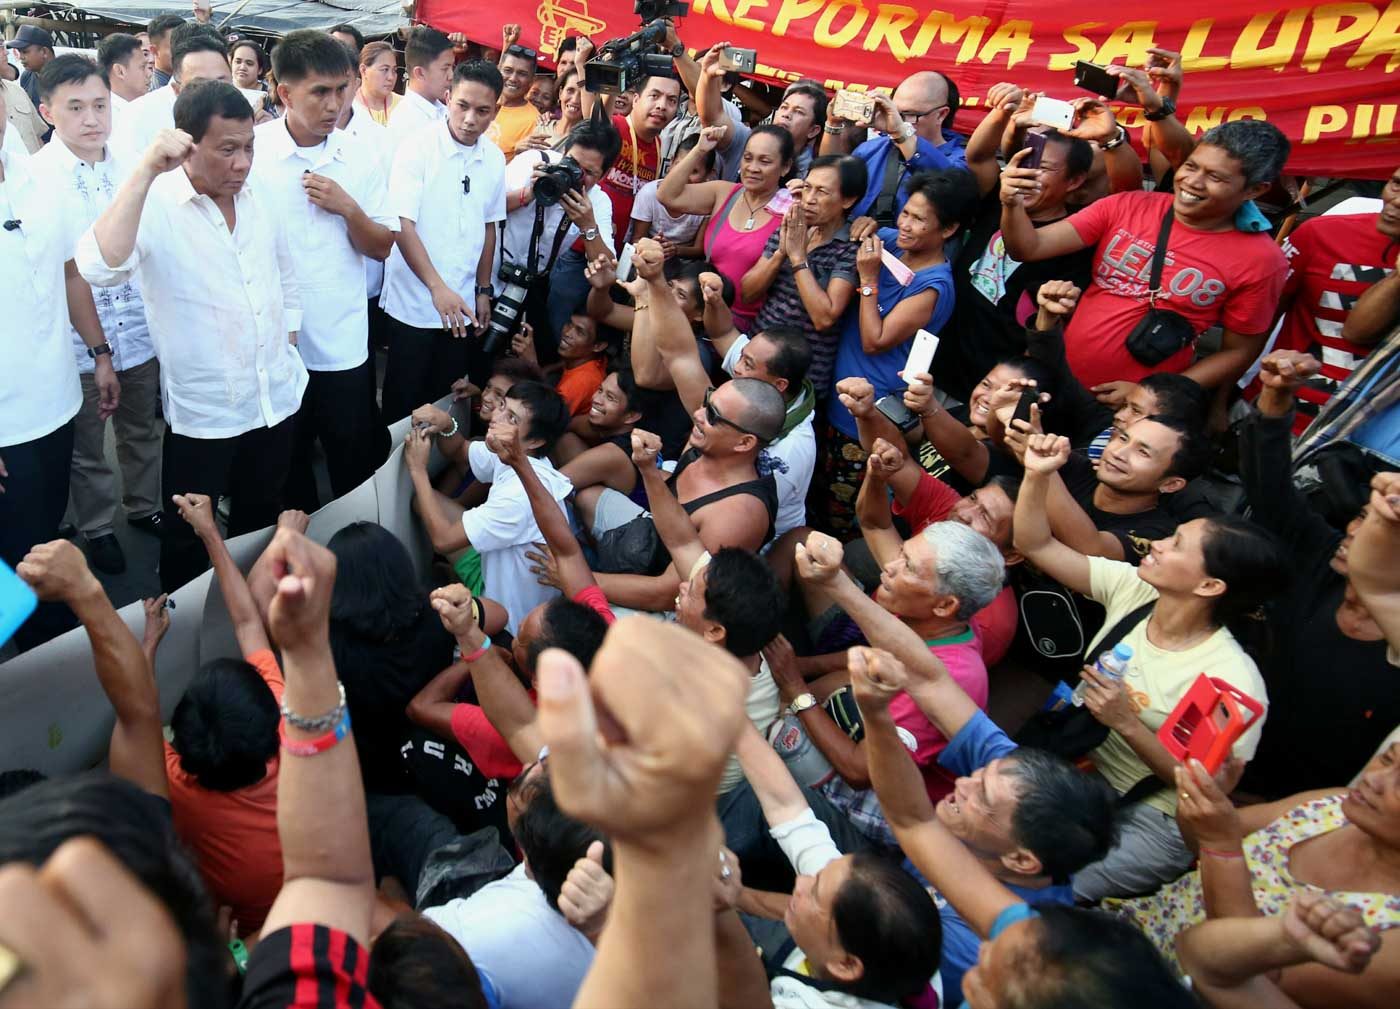 DIALOGUE WITH LAPANDAY FARMERS. President Rodrigo Duterte goes to the picket line at the foot of Mendiola Bridge near Malacañang on May 9, 2017 to talk to farmers from Tagum City, Davao del Norte. Photo by Ben Nabong/Rappler  